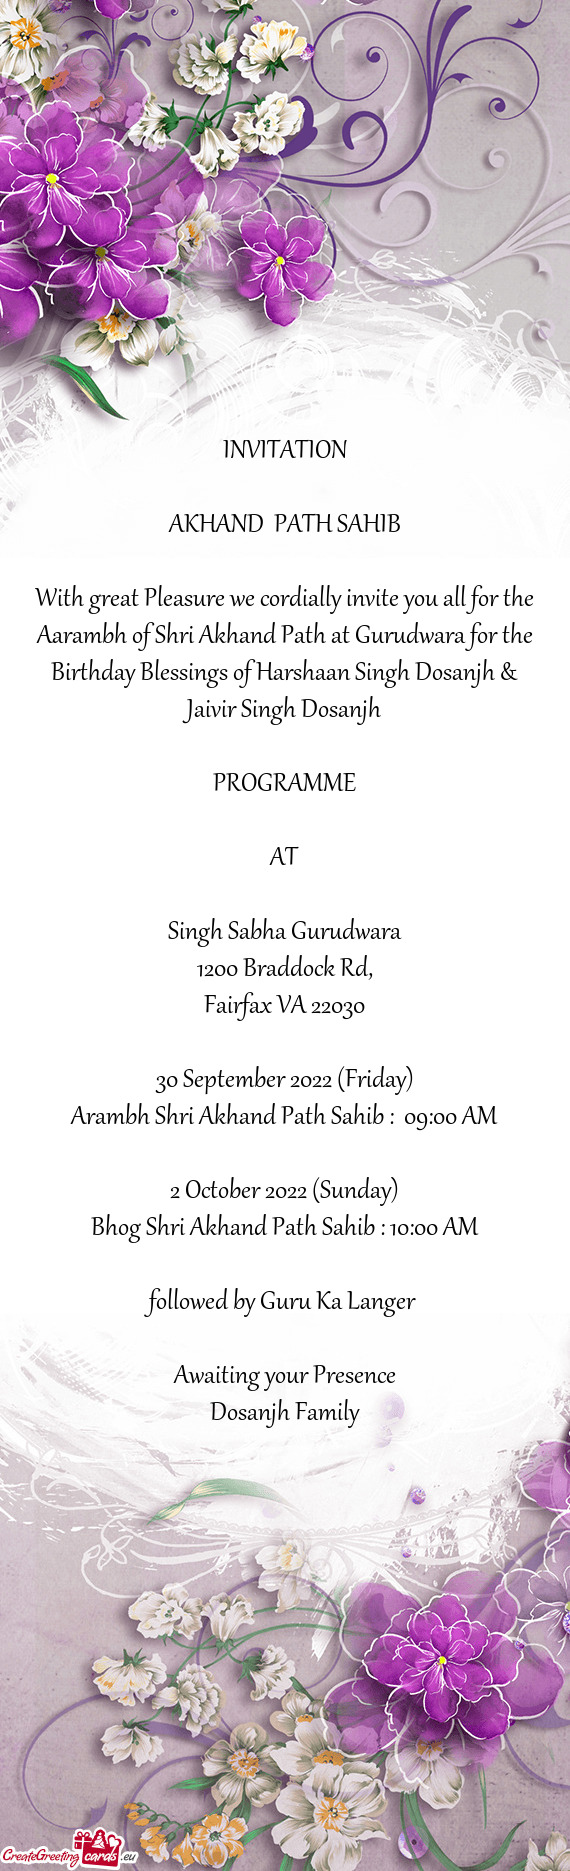 With great Pleasure we cordially invite you all for the Aarambh of Shri Akhand Path at Gurudwara for